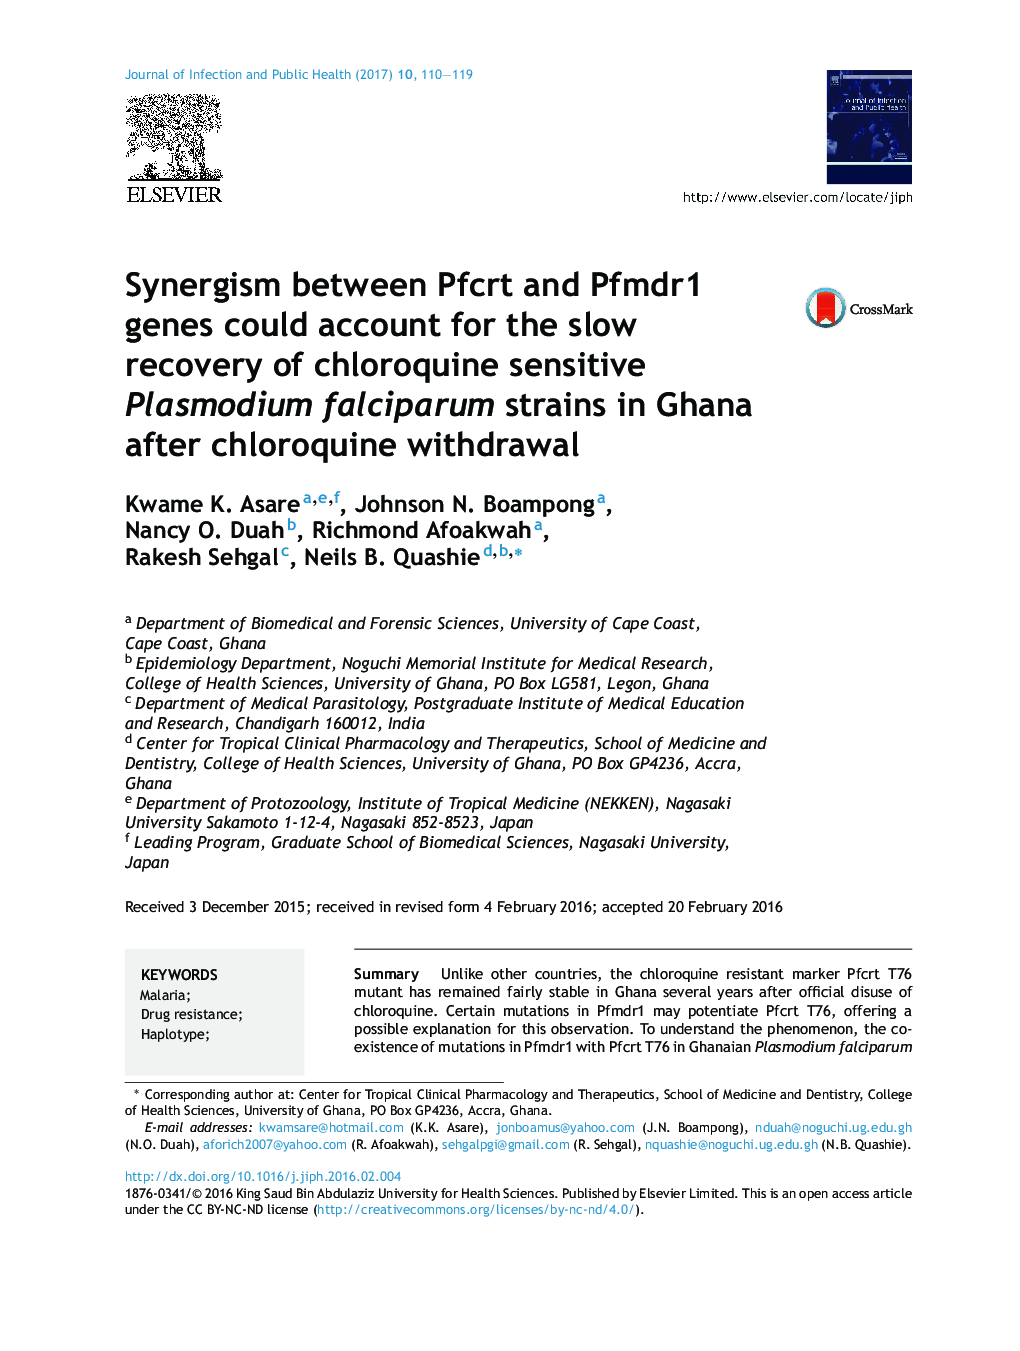 Synergism between Pfcrt and Pfmdr1 genes could account for the slow recovery of chloroquine sensitive Plasmodium falciparum strains in Ghana after chloroquine withdrawal